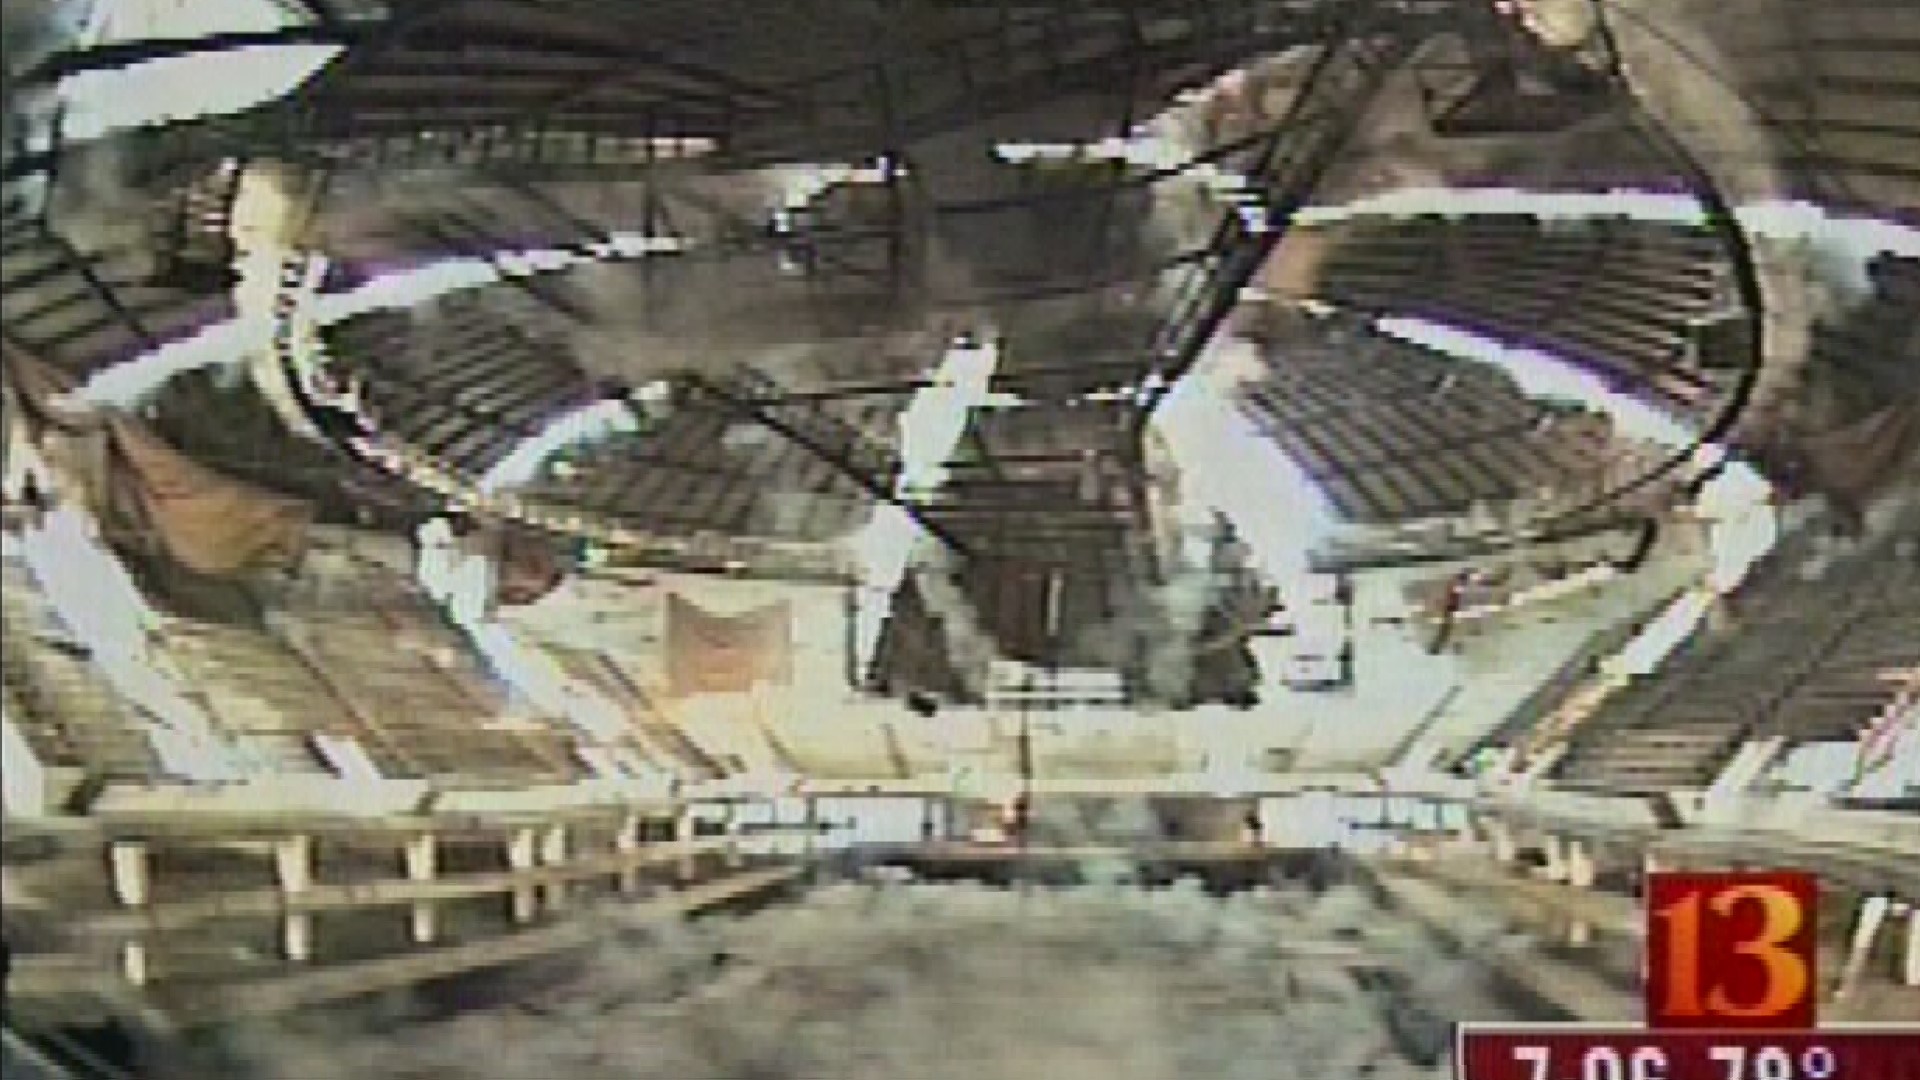 We dig into the 13 News archives and show you highlights of our coverage of the Market Square Arena implosion from July 1st 2001.